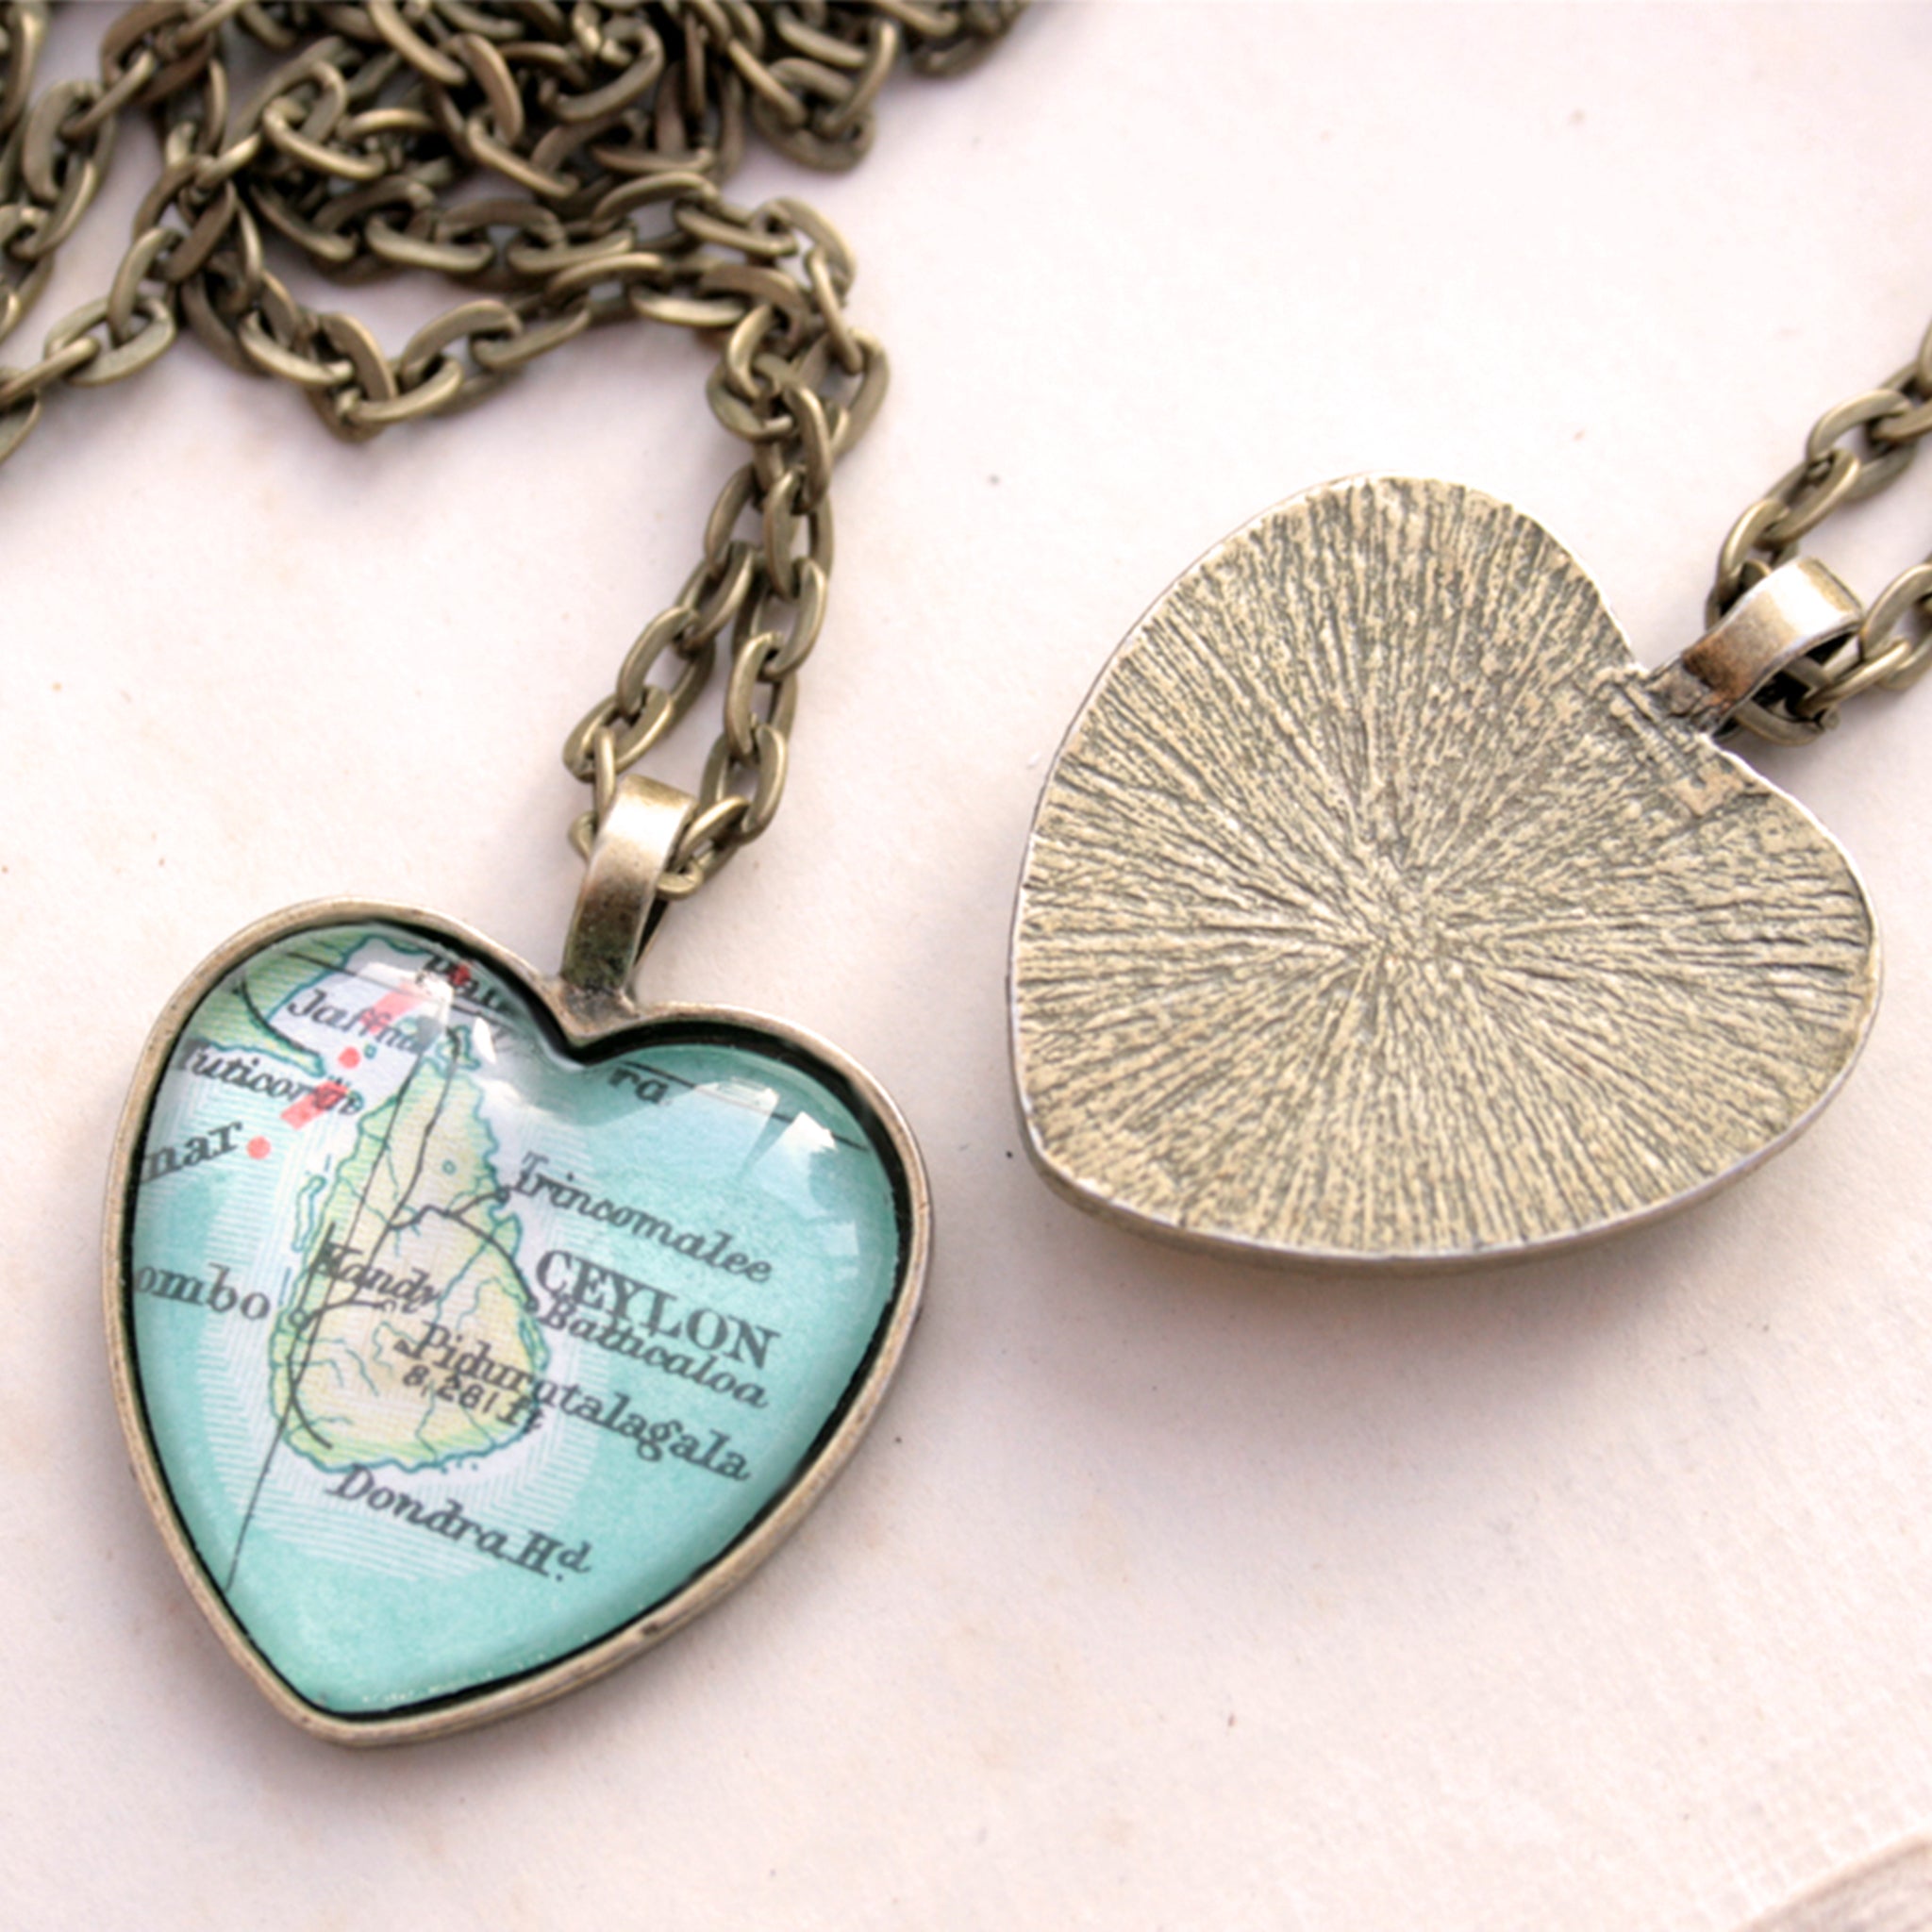 Heart shaped pendant necklace in bronze tone featuring map of Ceylon